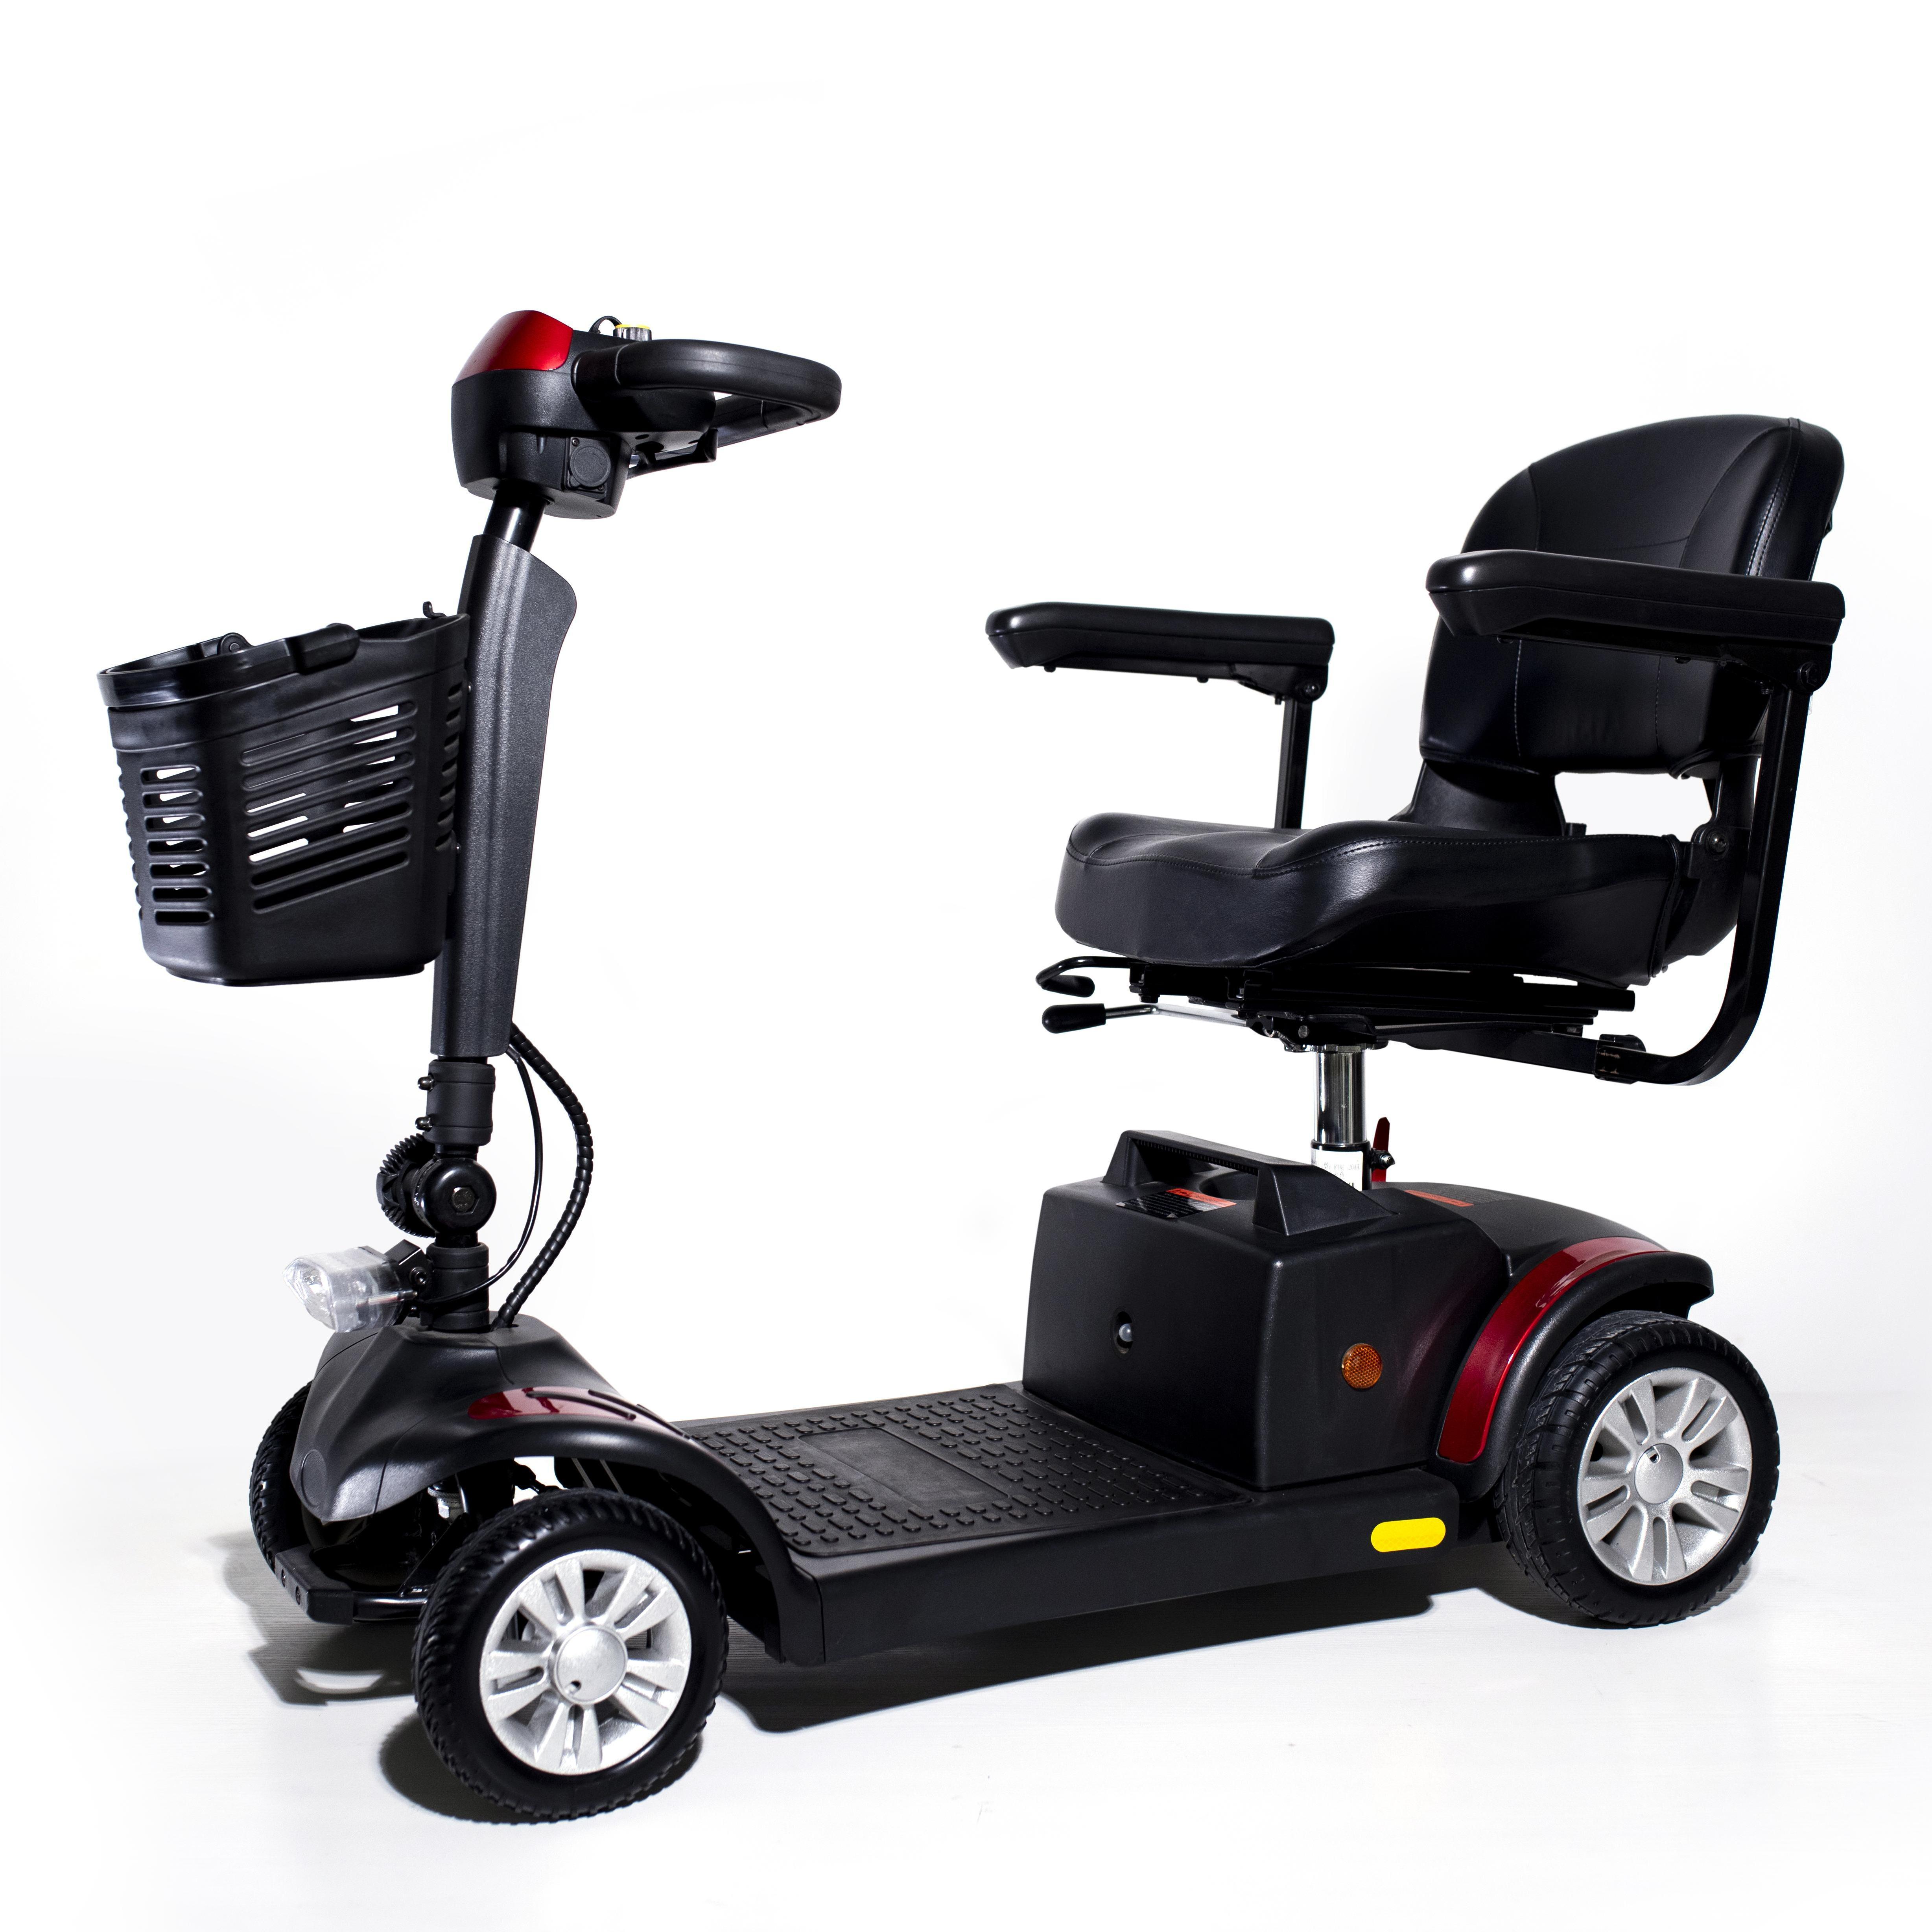 Jiangte 4 wheels detachable CE mobility scooter R103-20AH for elderly